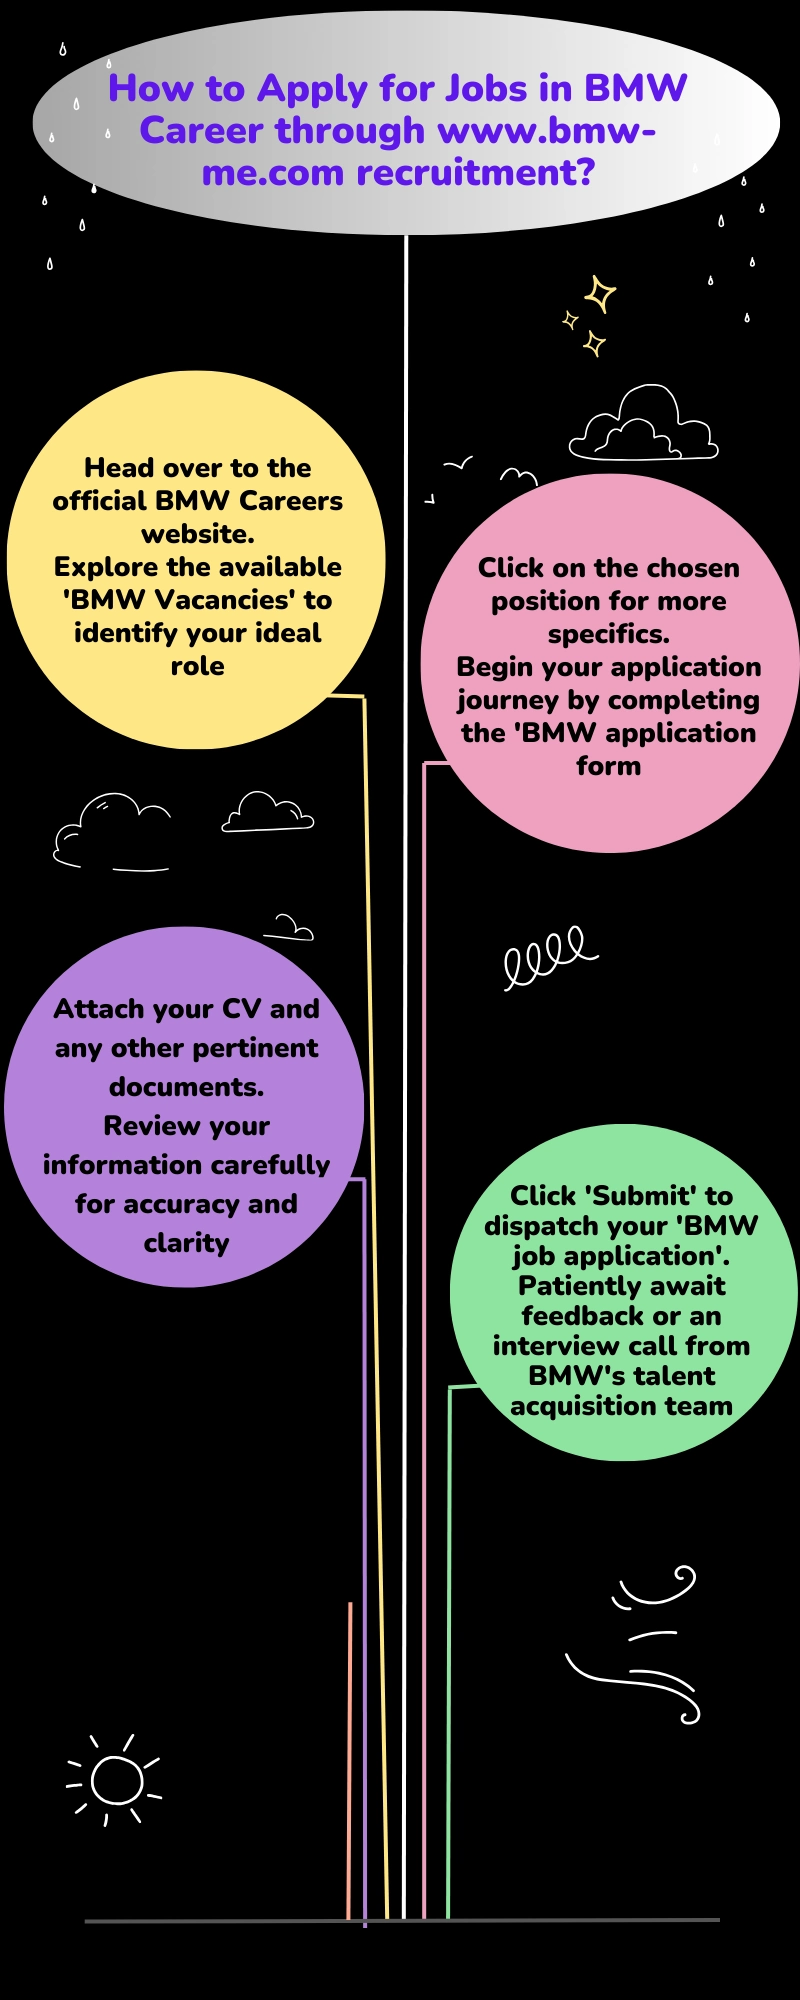 How to Apply for Jobs in BMW Career through www.bmw-me.com recruitment?